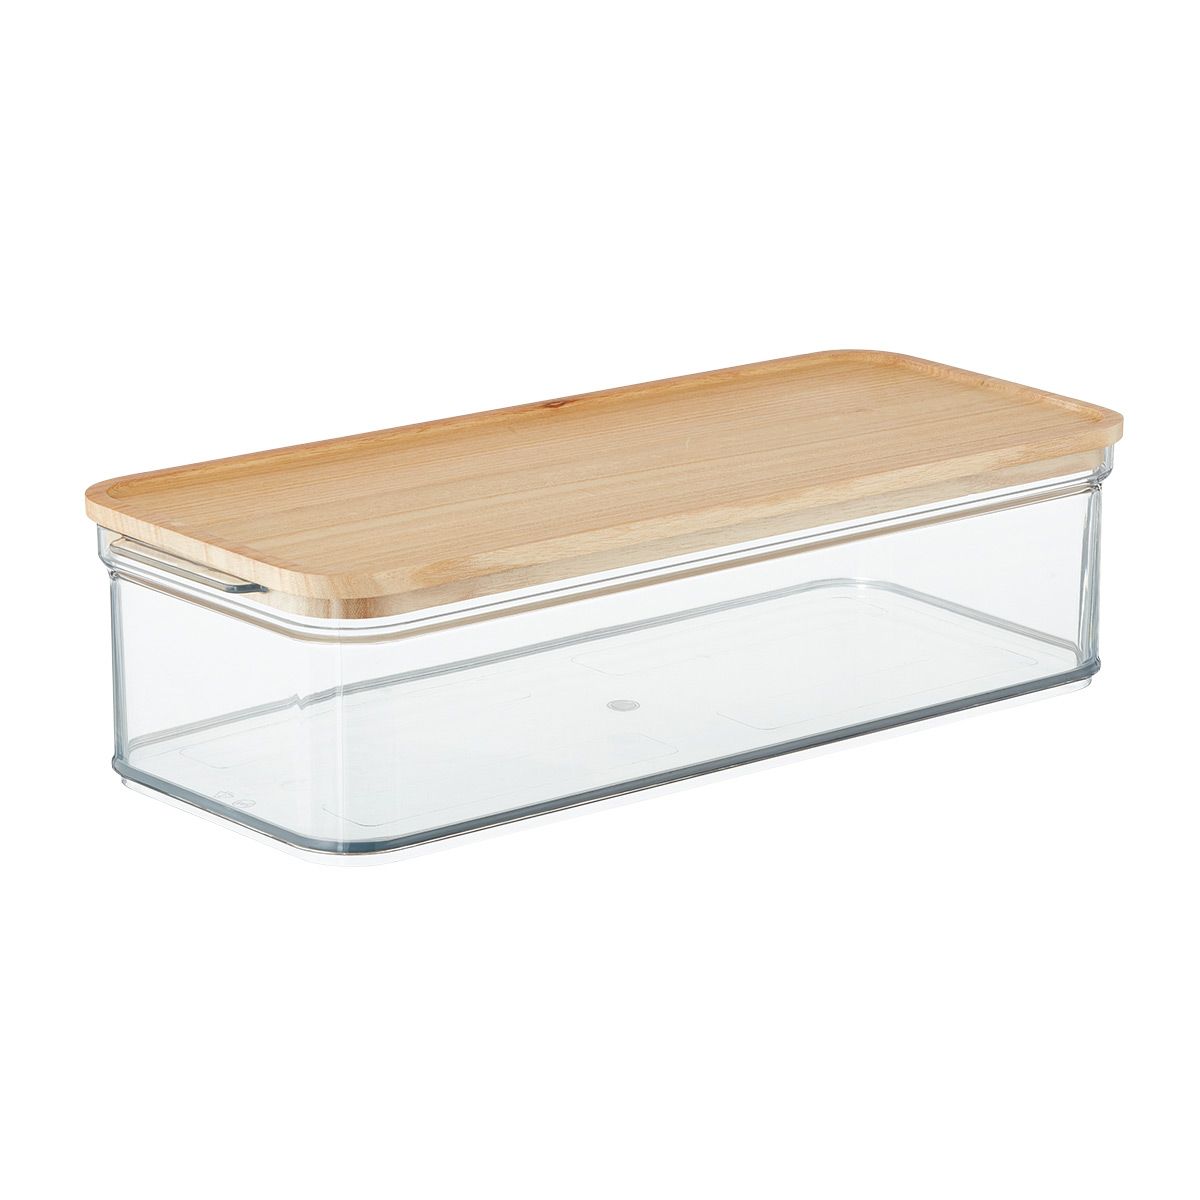 Rosanna Pansino x iD Extra Large Organizer w/ Wood Lid Clear | The Container Store